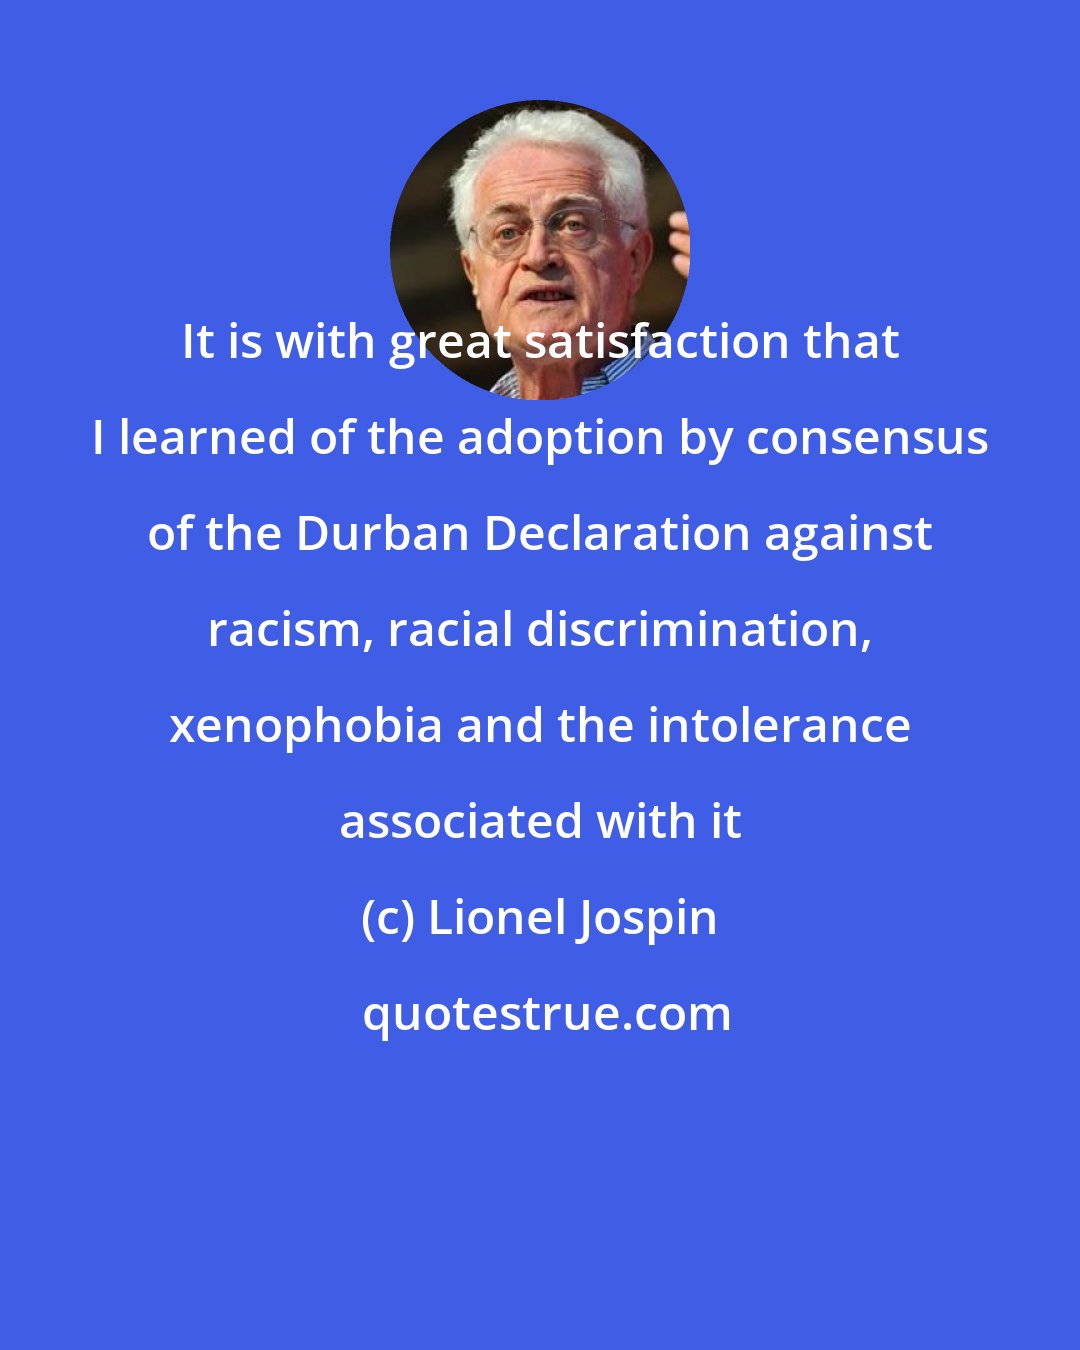 Lionel Jospin: It is with great satisfaction that I learned of the adoption by consensus of the Durban Declaration against racism, racial discrimination, xenophobia and the intolerance associated with it